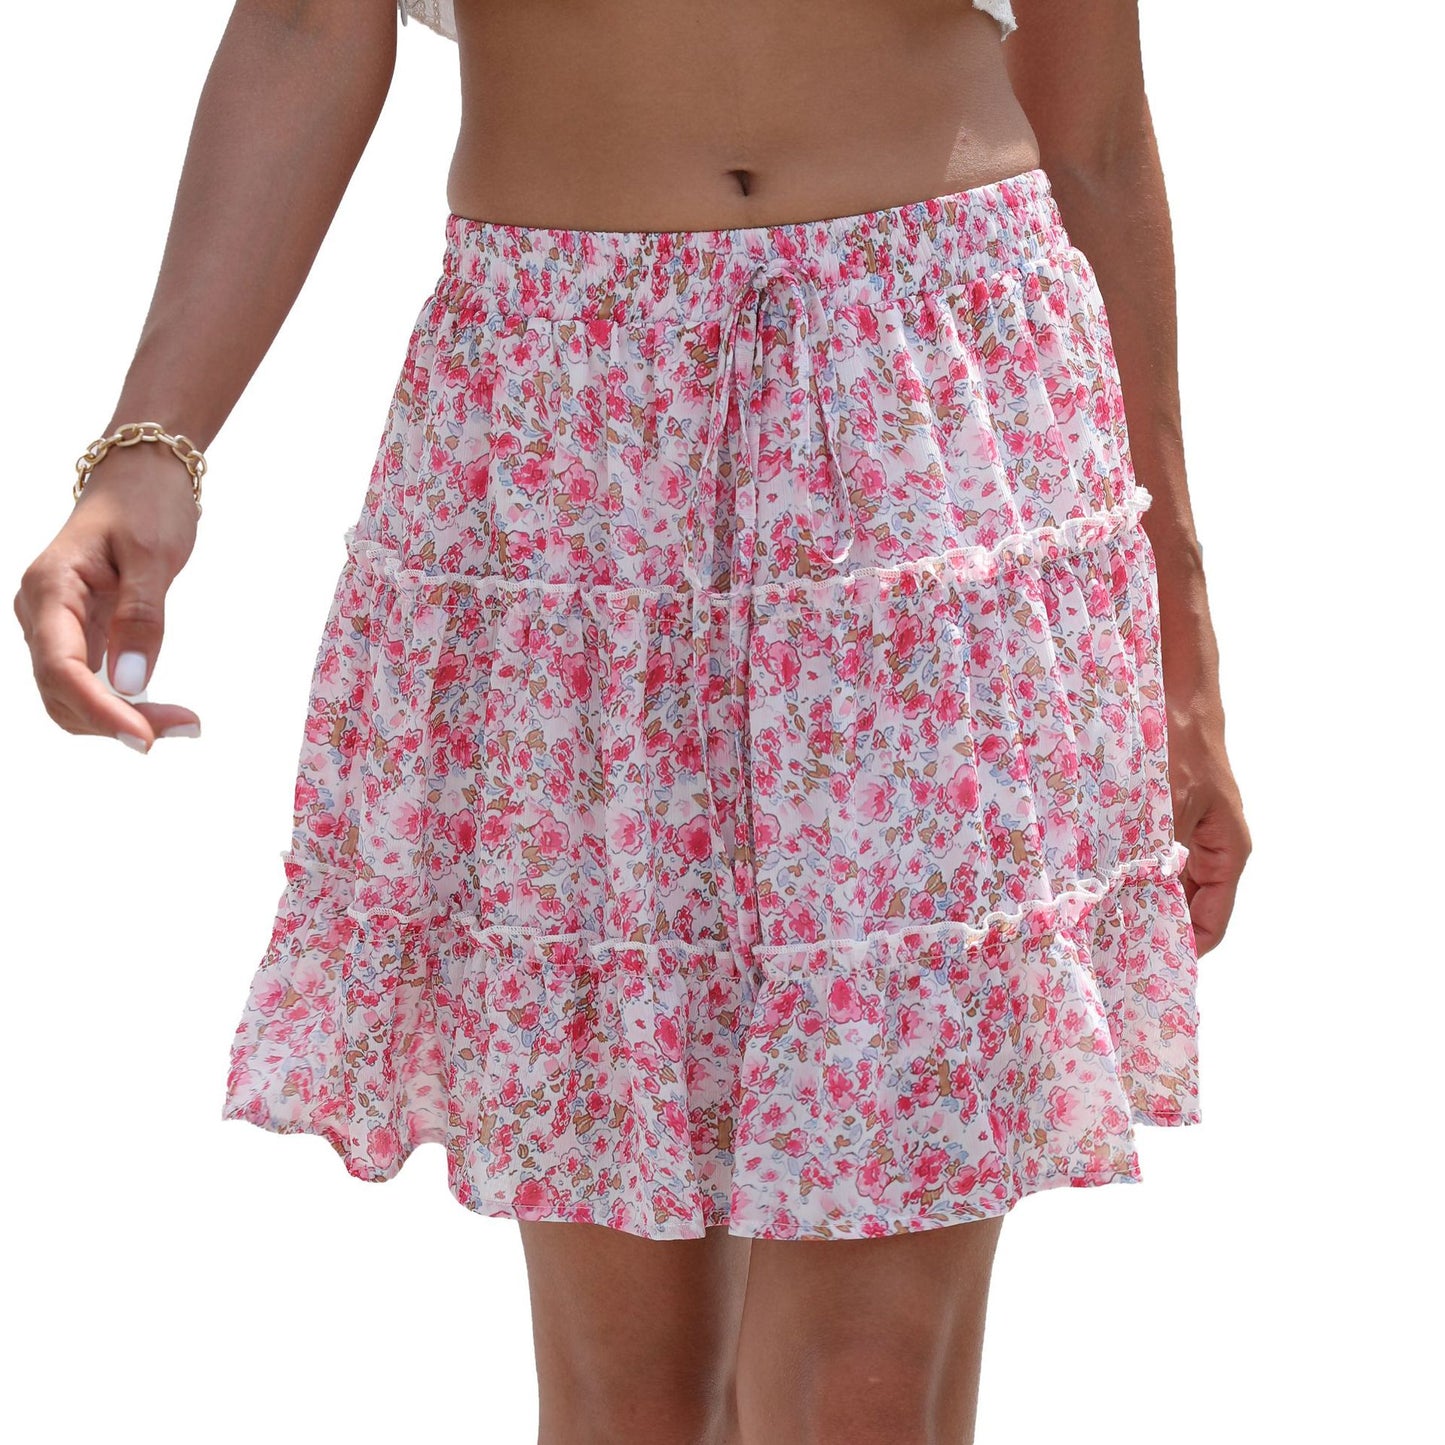 Stitching Floral Skirt